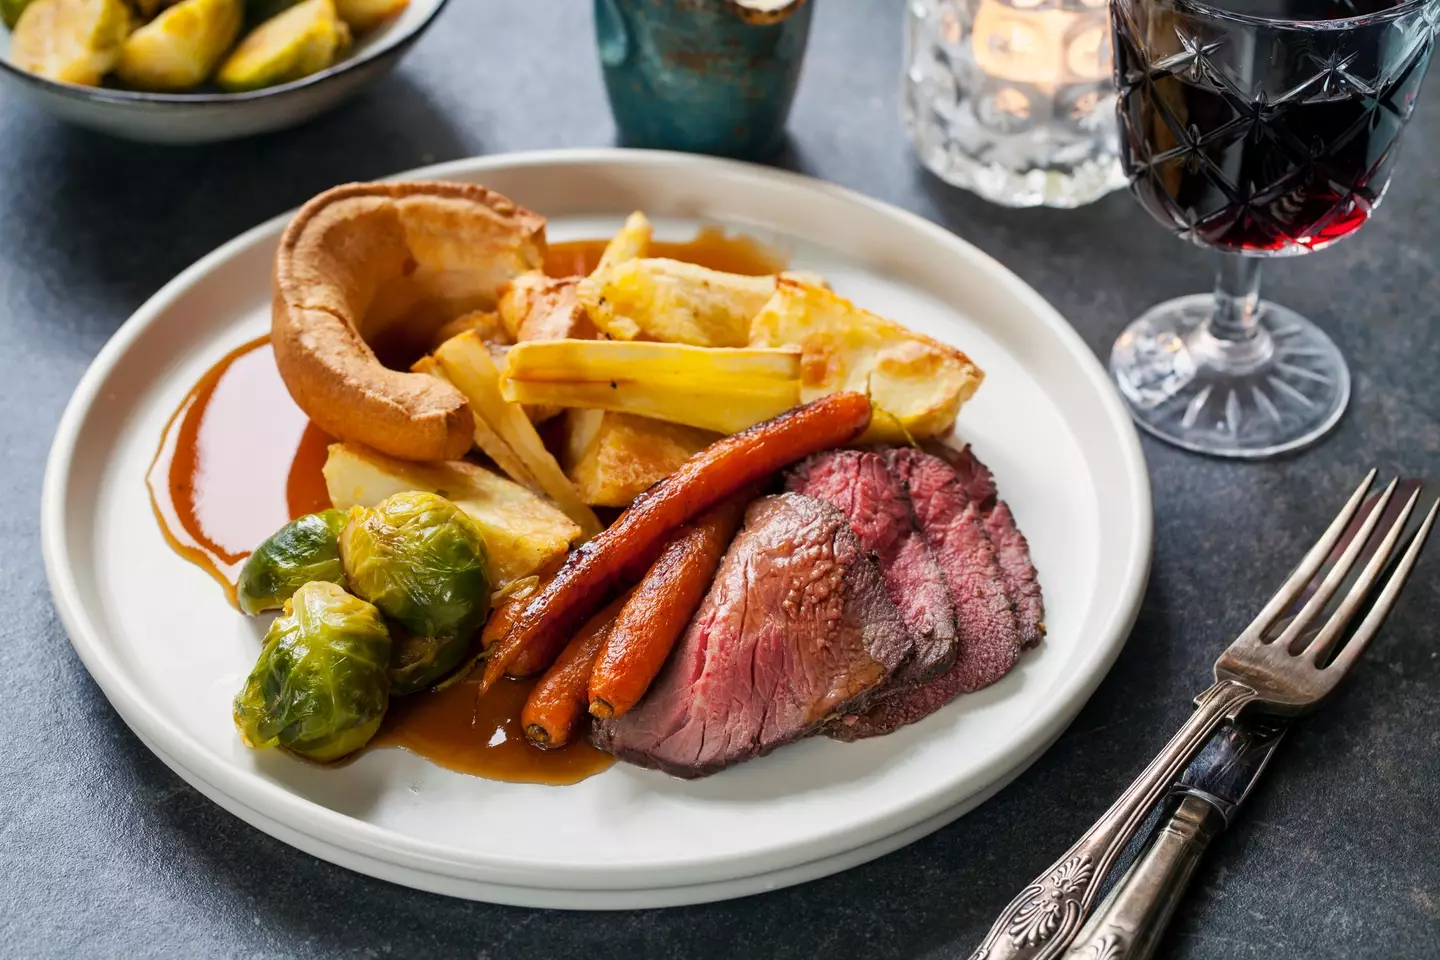 It turns out that not all roast dinners are the same!